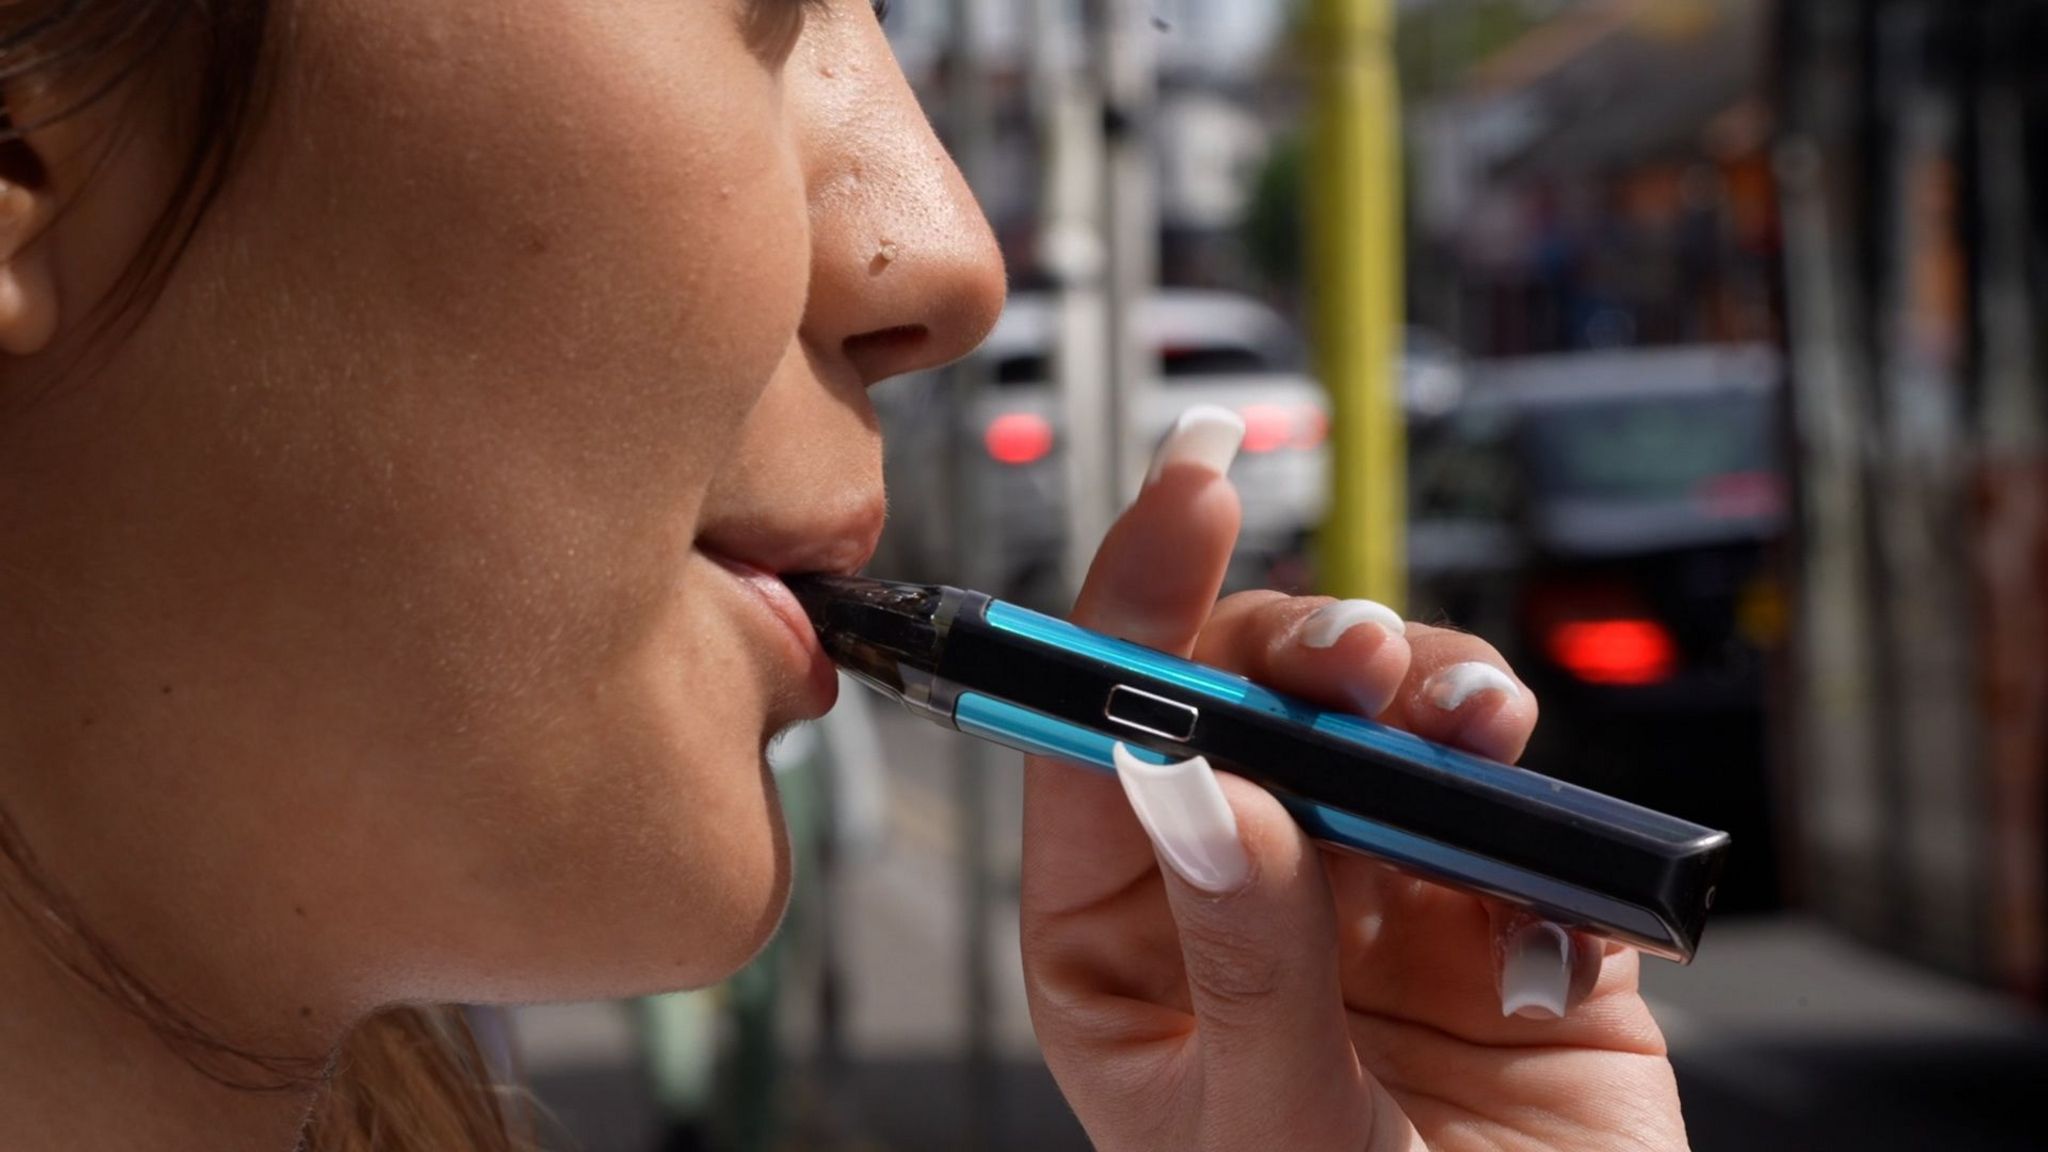 A new survey by Action on Smoking and Health Wales (Ash) found more than half of secondary school pupils who vaped were likely to be using illegal products